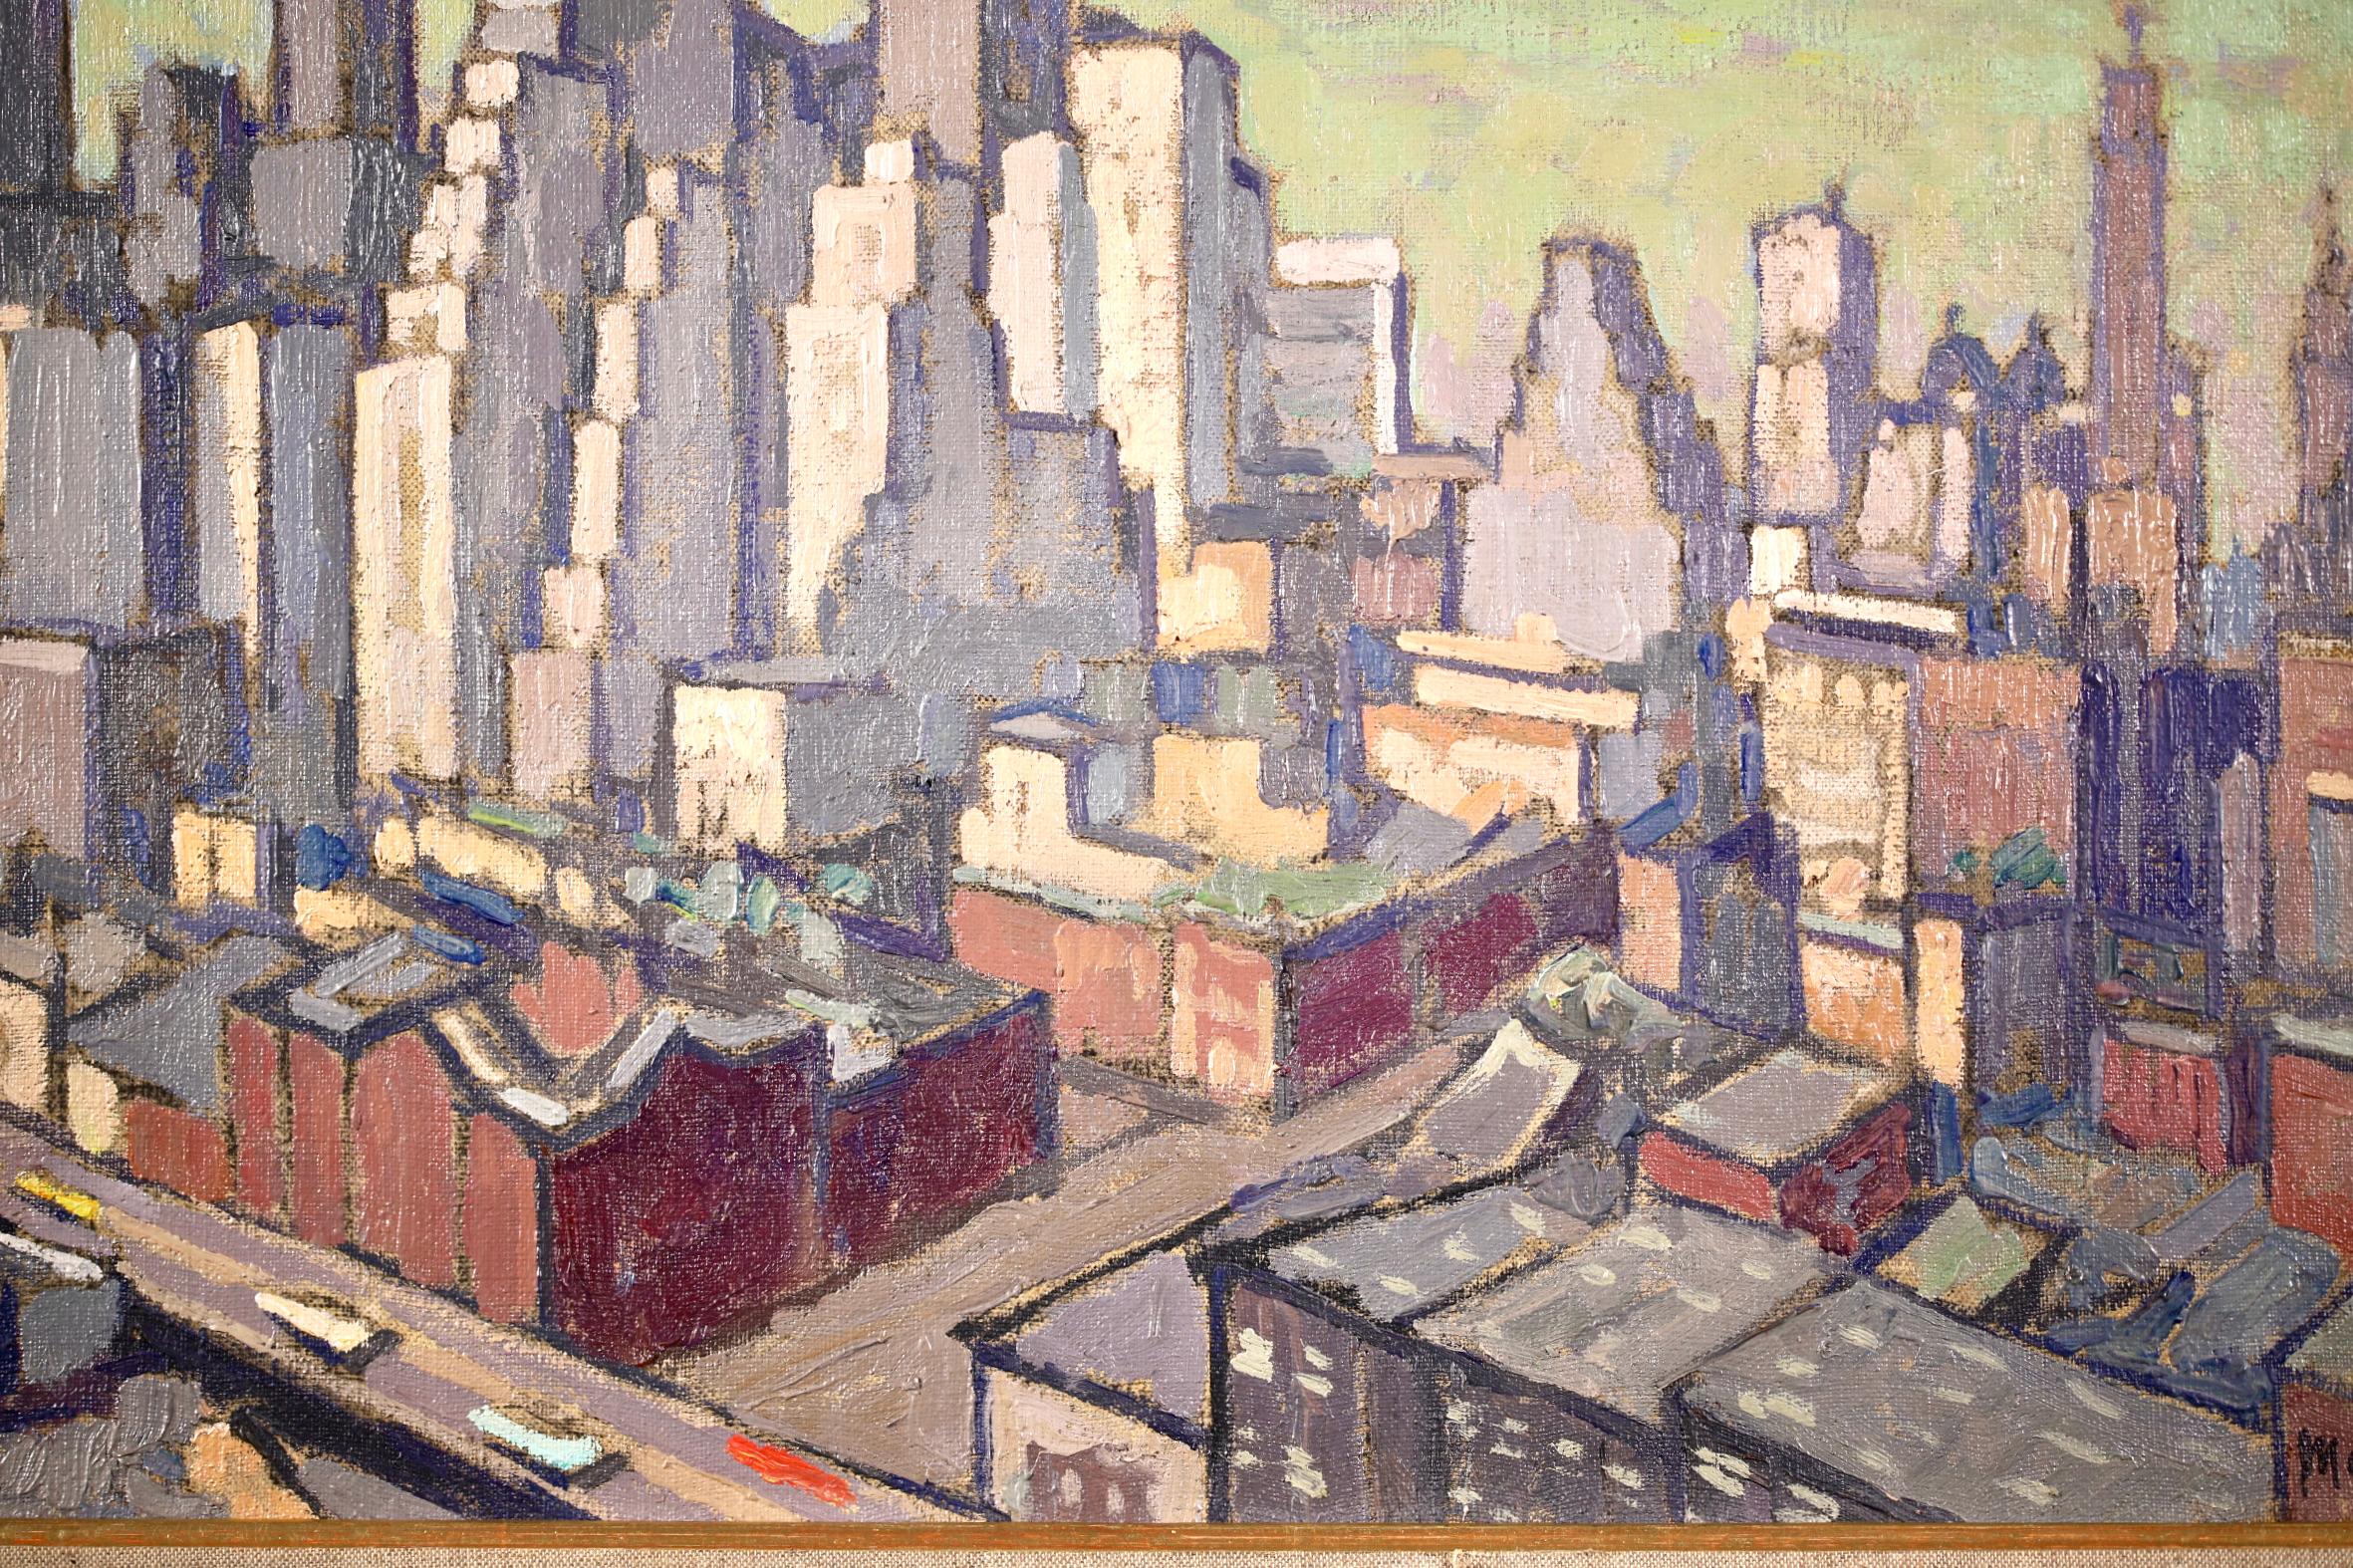 A stunning oil on canvas urban landscape by sought after French post-impressionist painter Jacques Martin-Ferrieres. The piece depicts a very rare view of the Manhattan skyline - painted in December 1949 on his trip to the United States where he